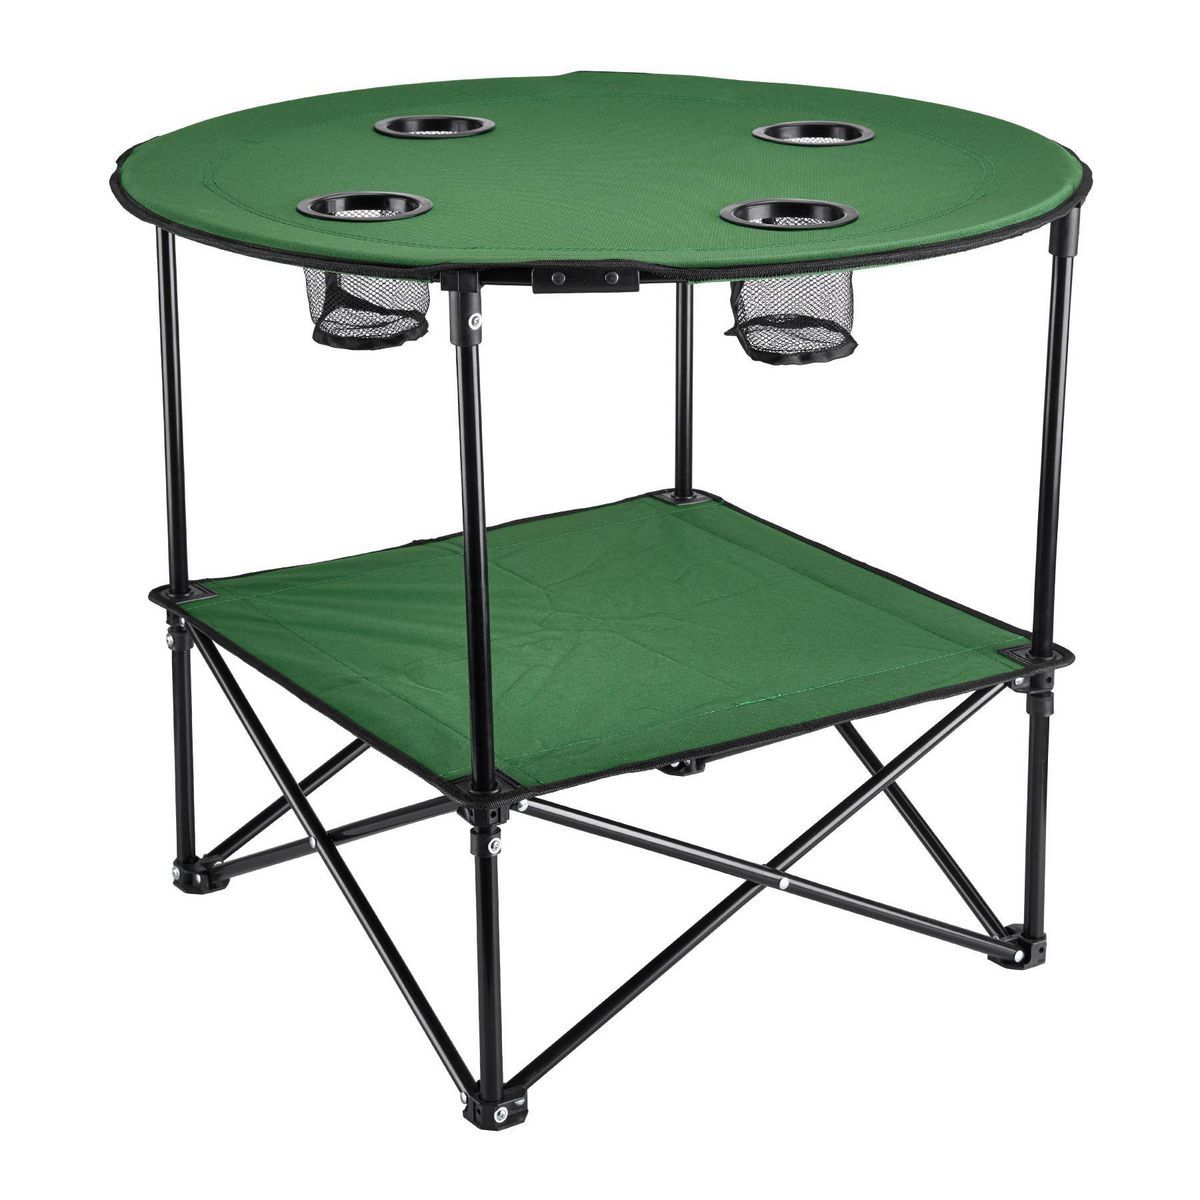 CREATIVE OUTDOOR Foldable Camping Table, Green